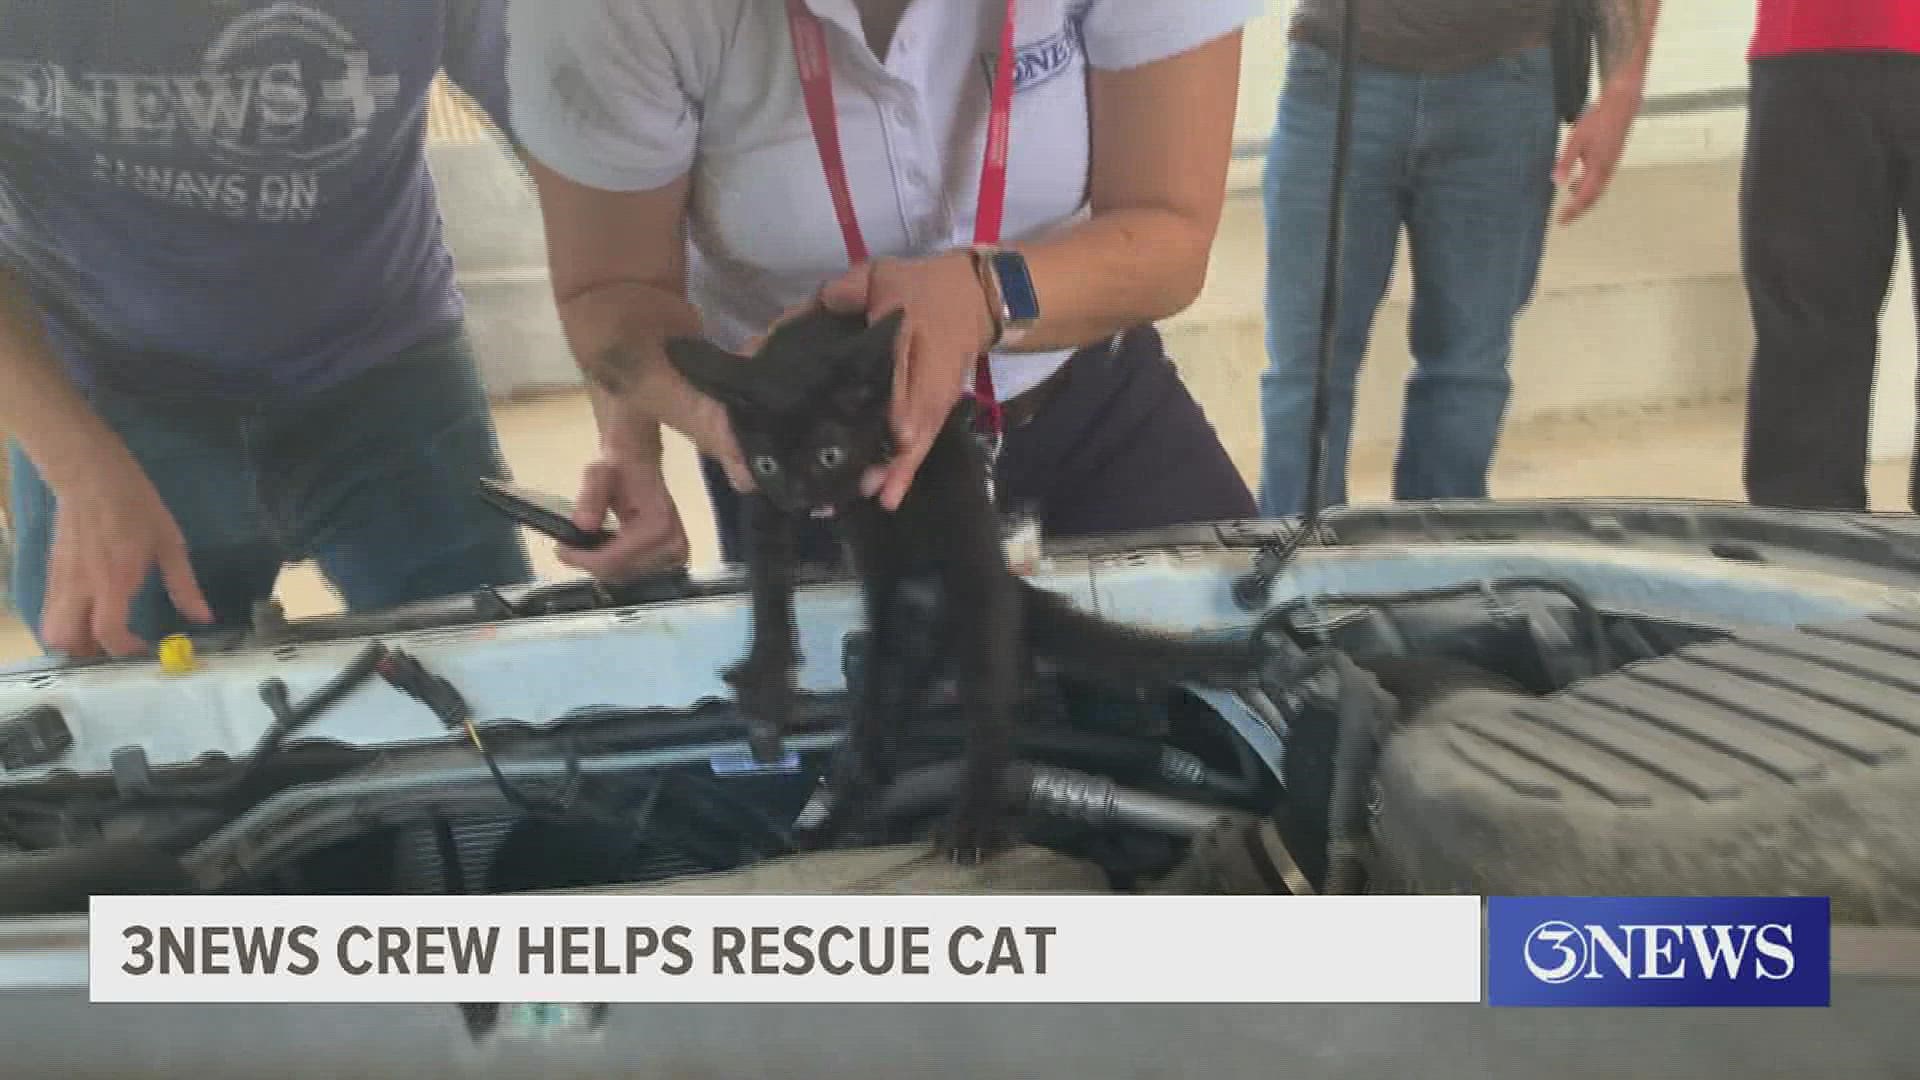 After getting close enough, 3NEWS Reporter Ashley Gonzalez was able to safely and carefully remove the kitten from the engine compartment.